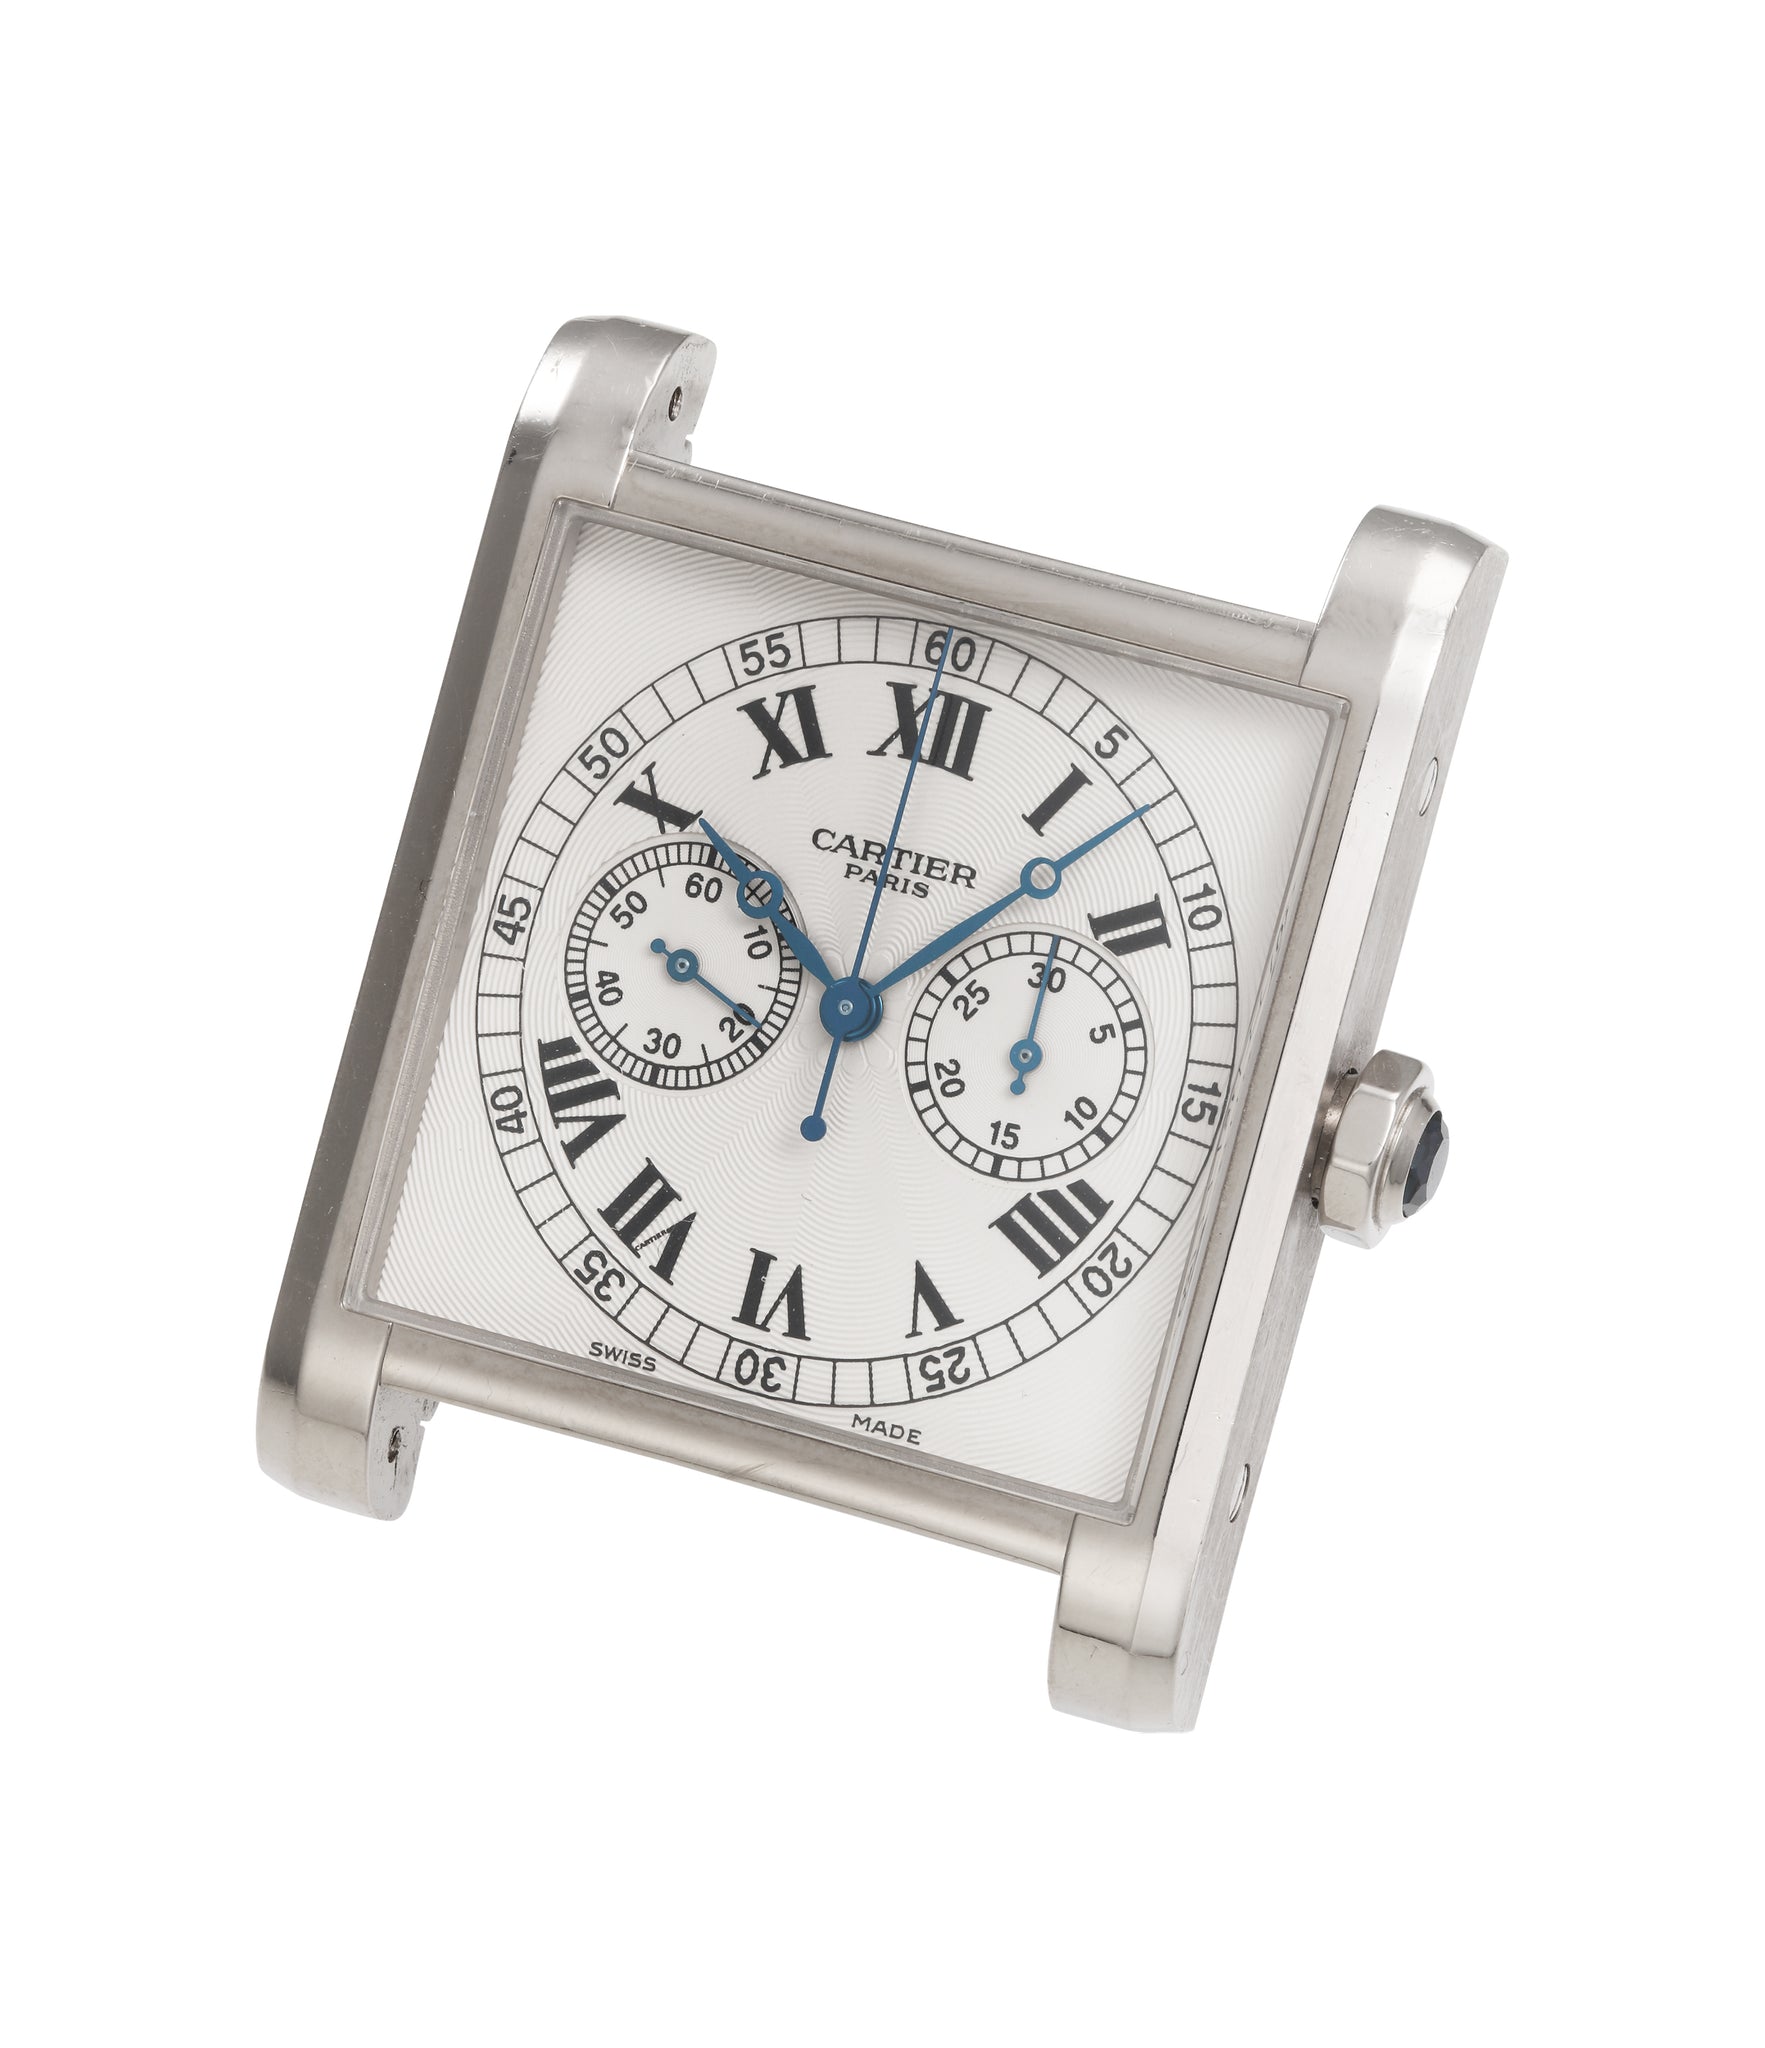 Cartier Collection Privée Cartier Paris Monopoussoir Ref. 2846 - Limited Edition of 100 pieces | Dial | White Gold | Available Worldwide At A Collected Man